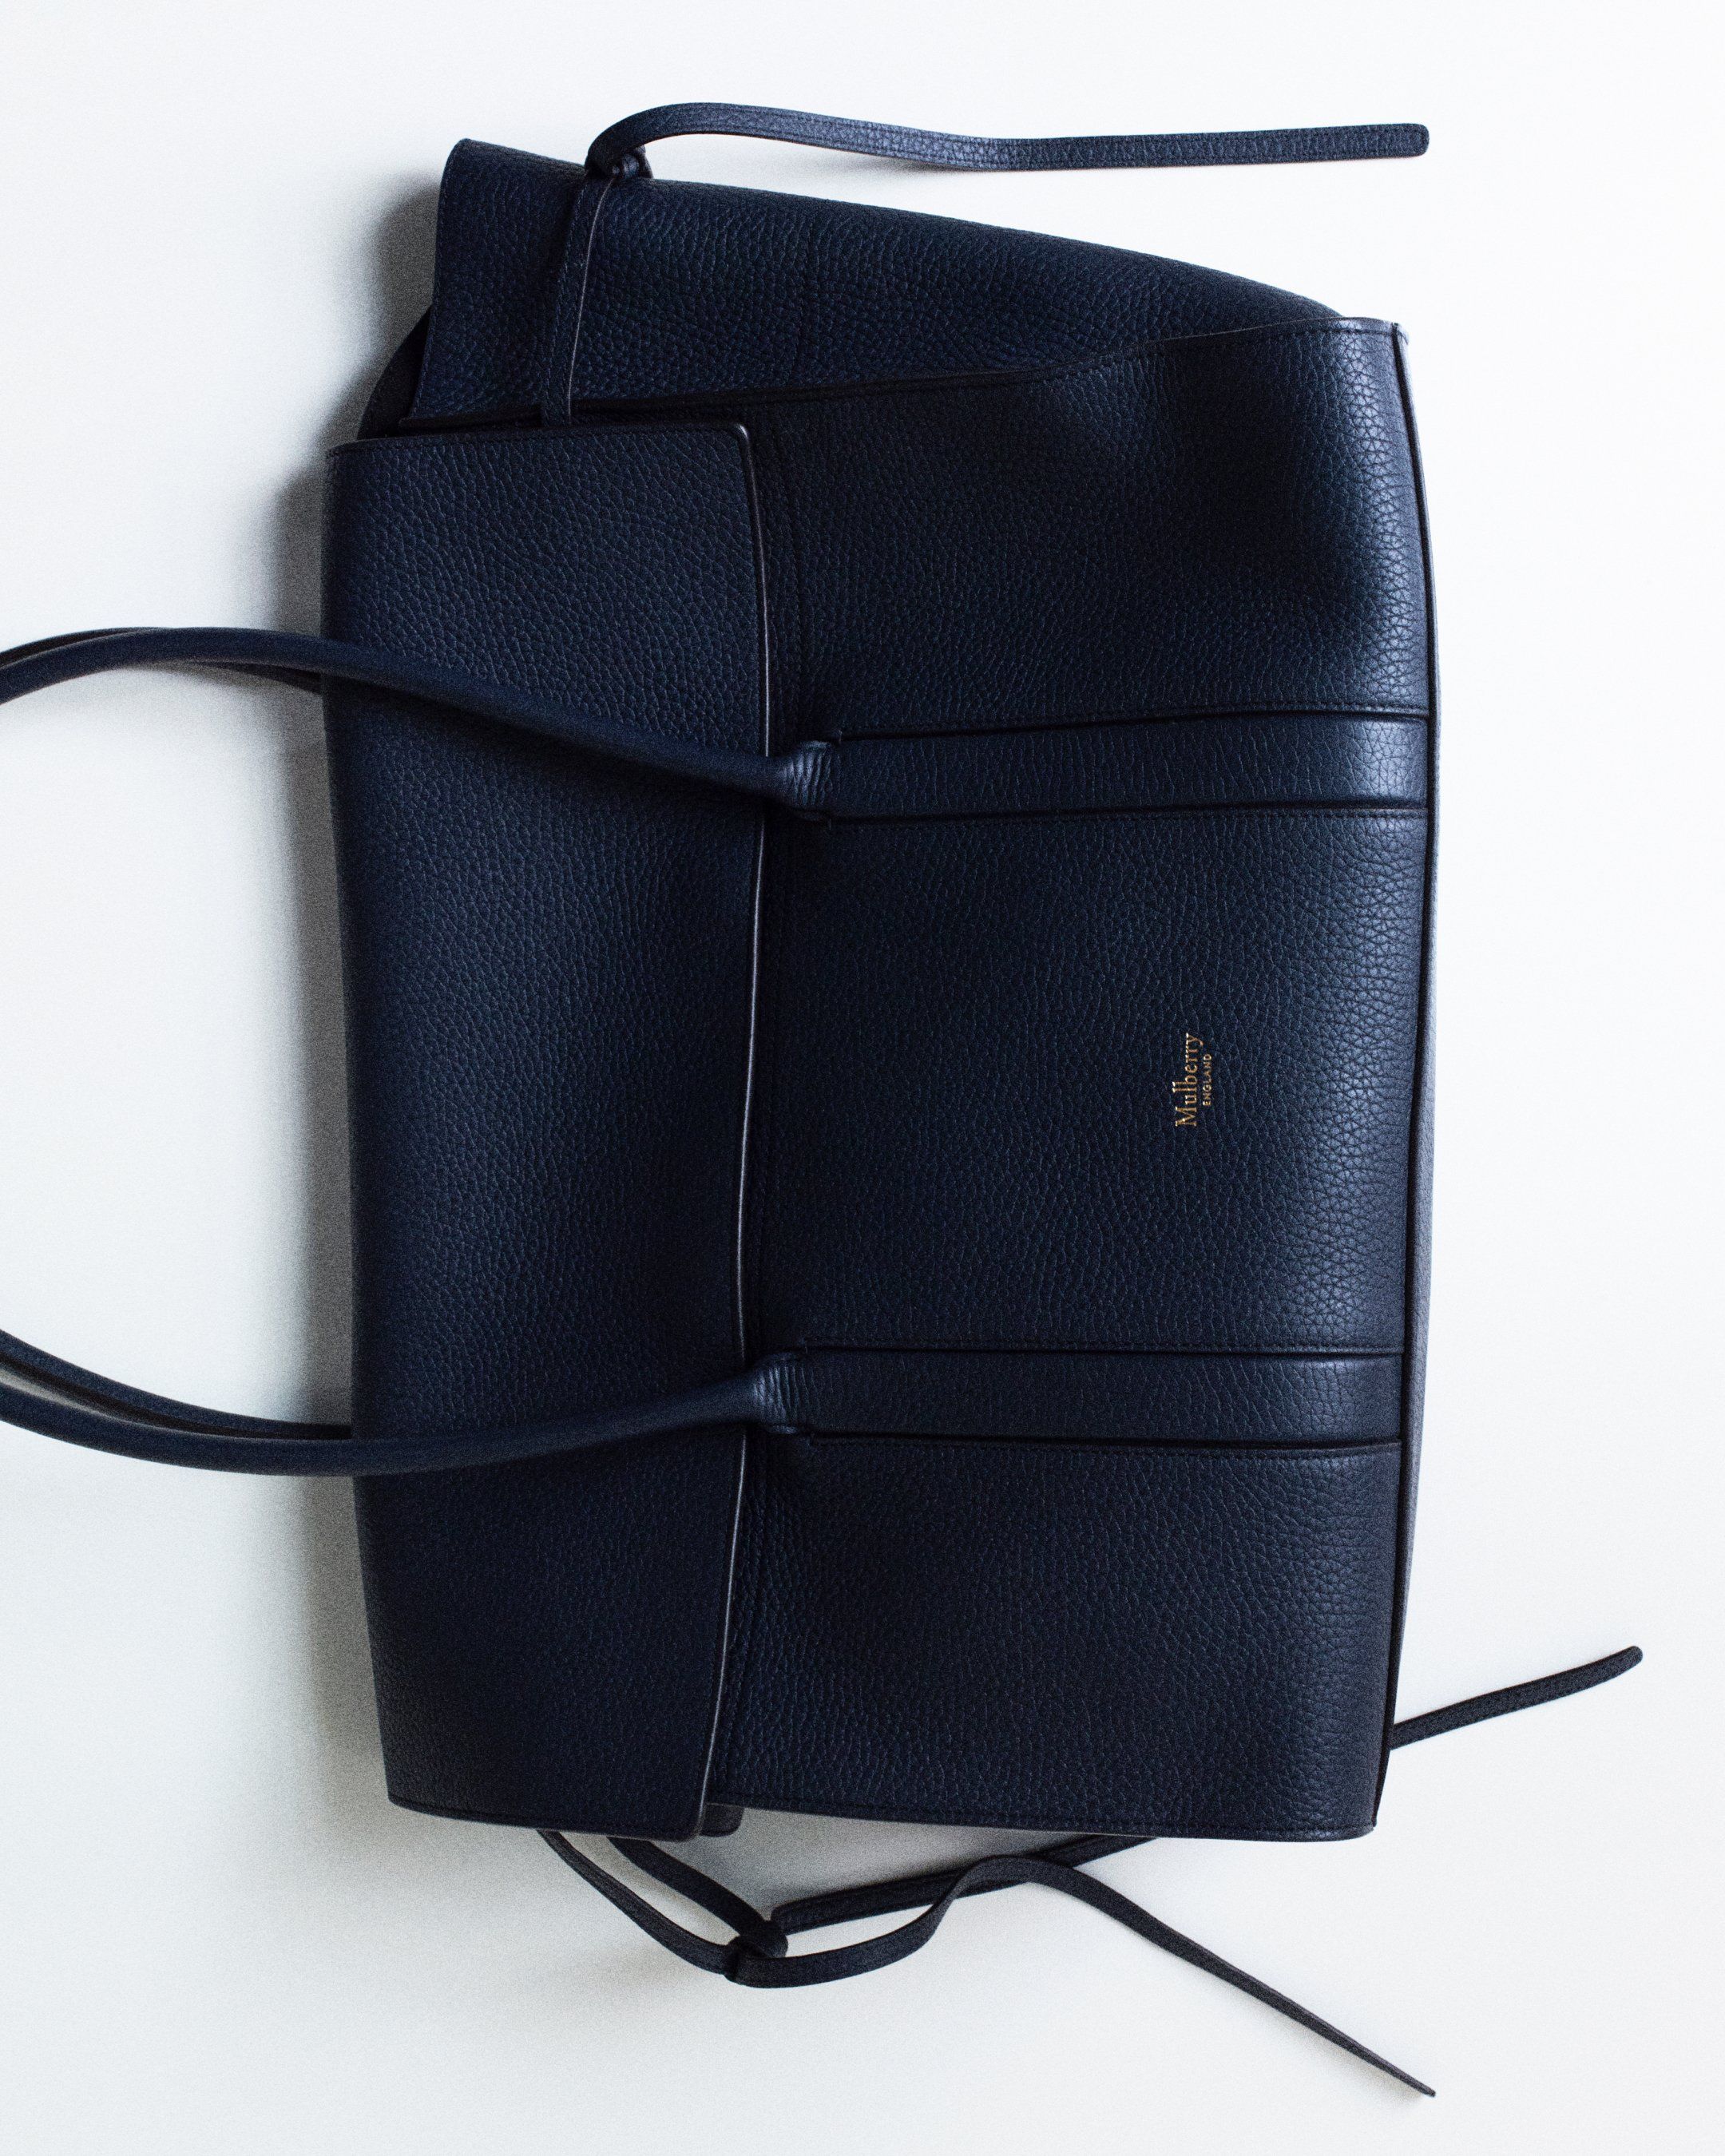 Mulberry Soft Bayswater in navy leather